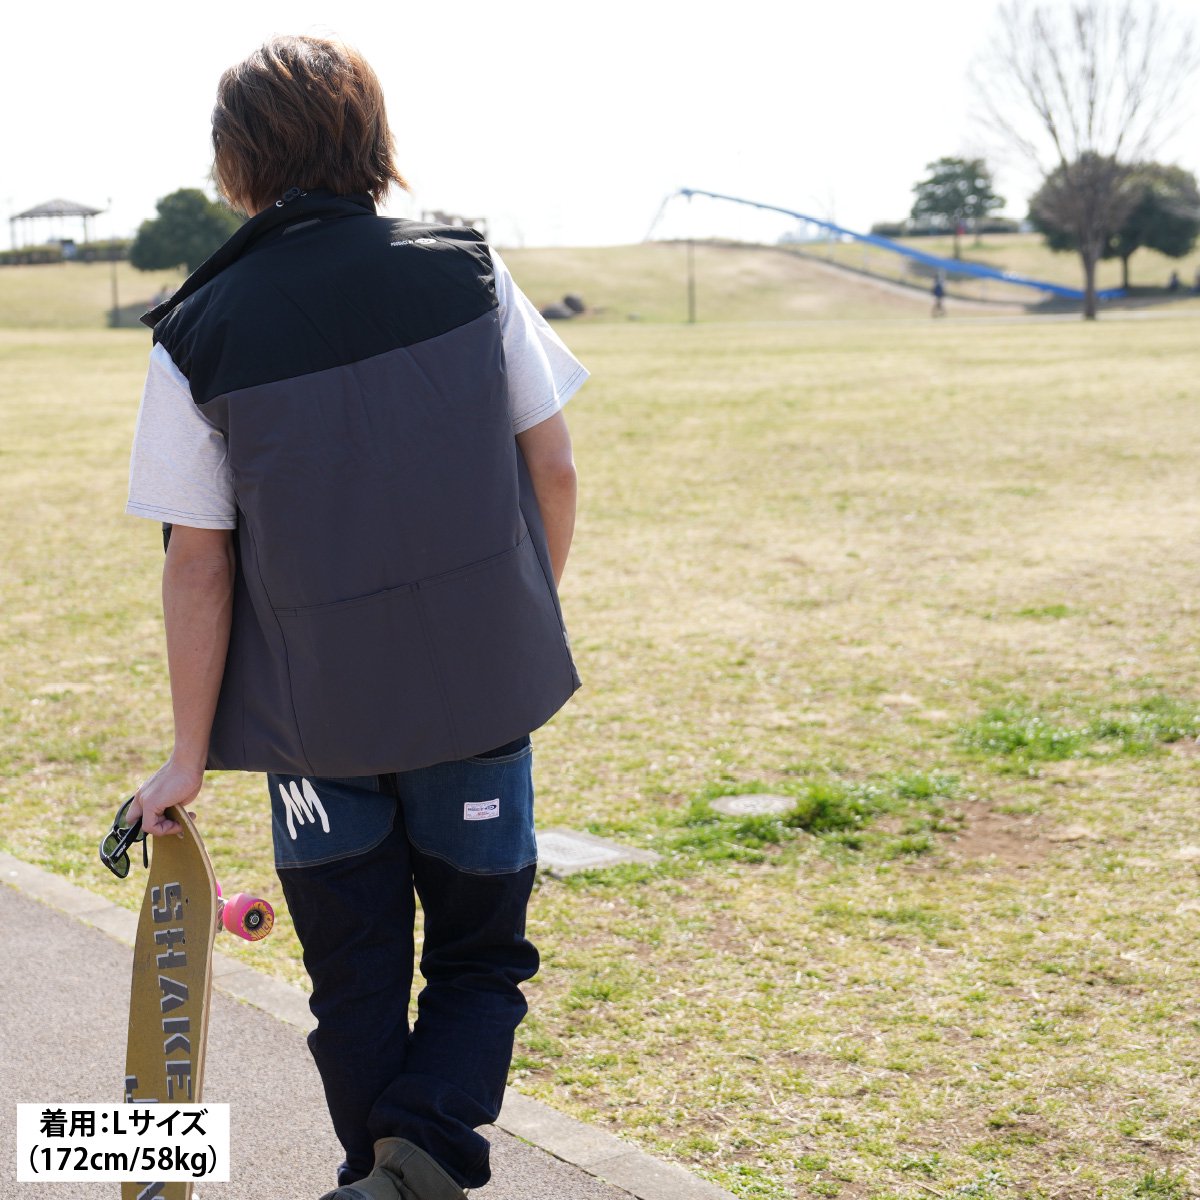 EZ puff vest<img class='new_mark_img2' src='https://img.shop-pro.jp/img/new/icons62.gif' style='border:none;display:inline;margin:0px;padding:0px;width:auto;' />